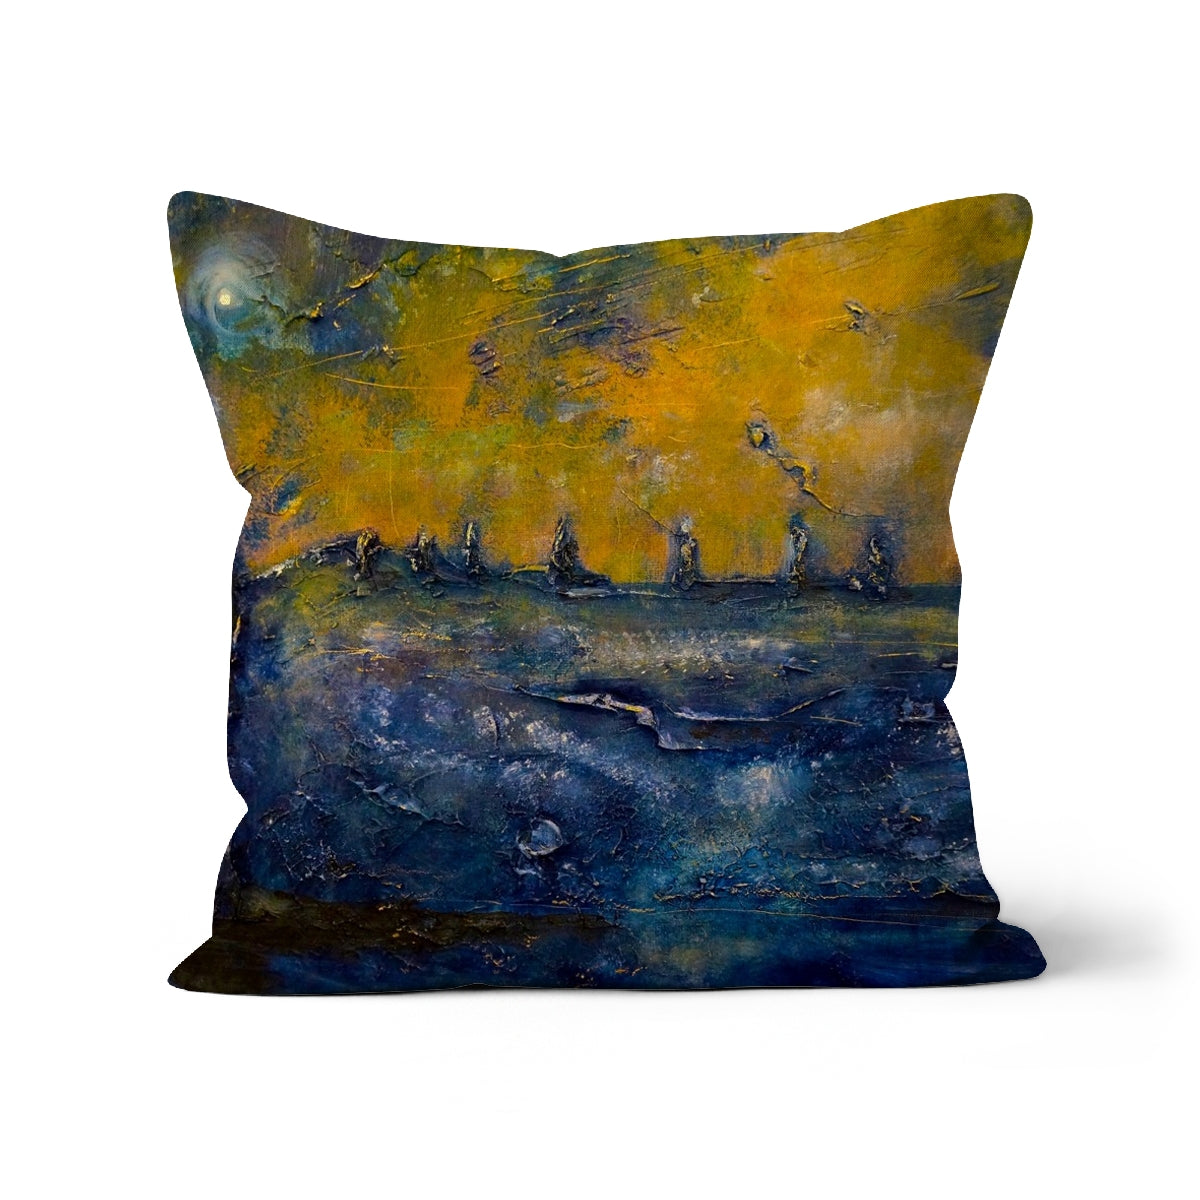 Brodgar Moonlight Orkney Art Gifts Cushion-Cushions-Orkney Art Gallery-Faux Suede-18"x18"-Paintings, Prints, Homeware, Art Gifts From Scotland By Scottish Artist Kevin Hunter